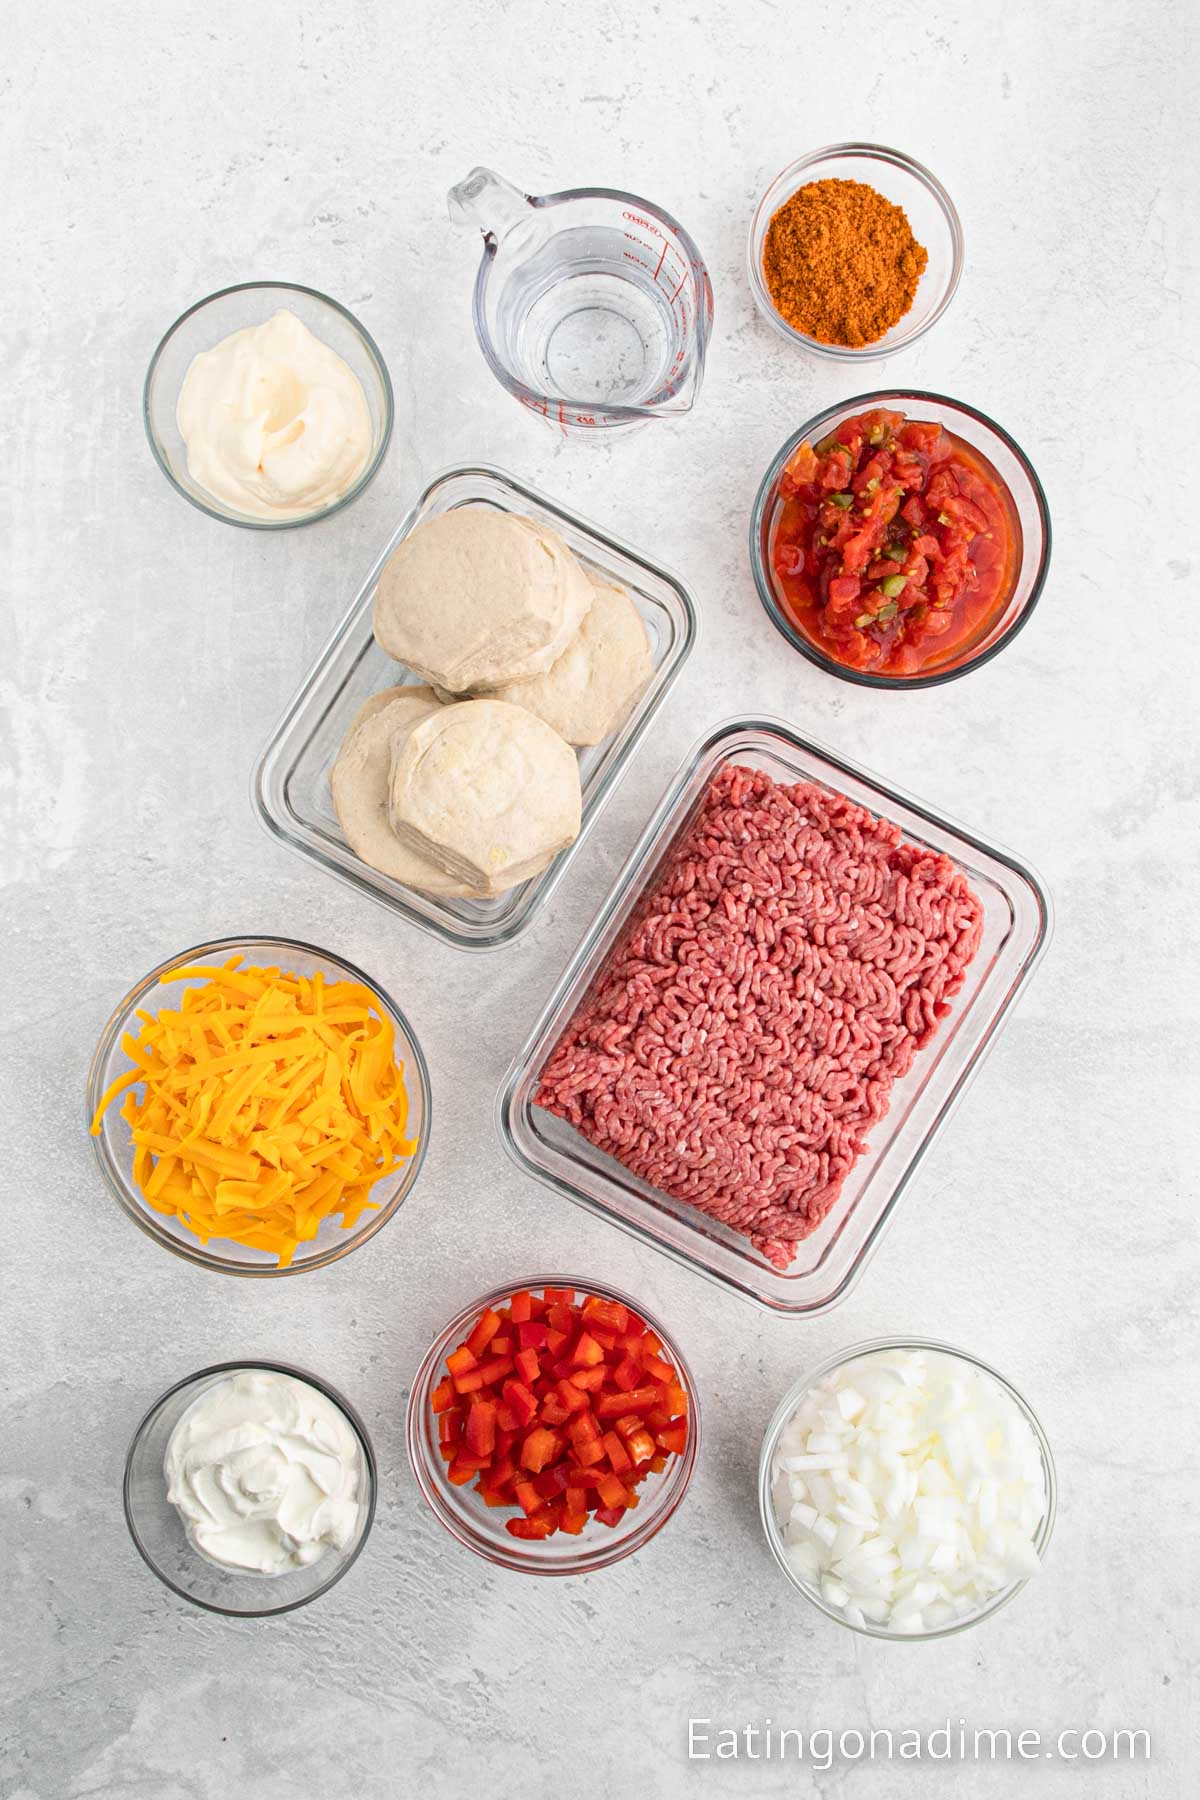 Ingredients needed for John Wayne casserole - Biscuits, beef, taco seasoning, water, onion, bell pepper, diced tomatoes, sour cream, mayonnaise, cheese